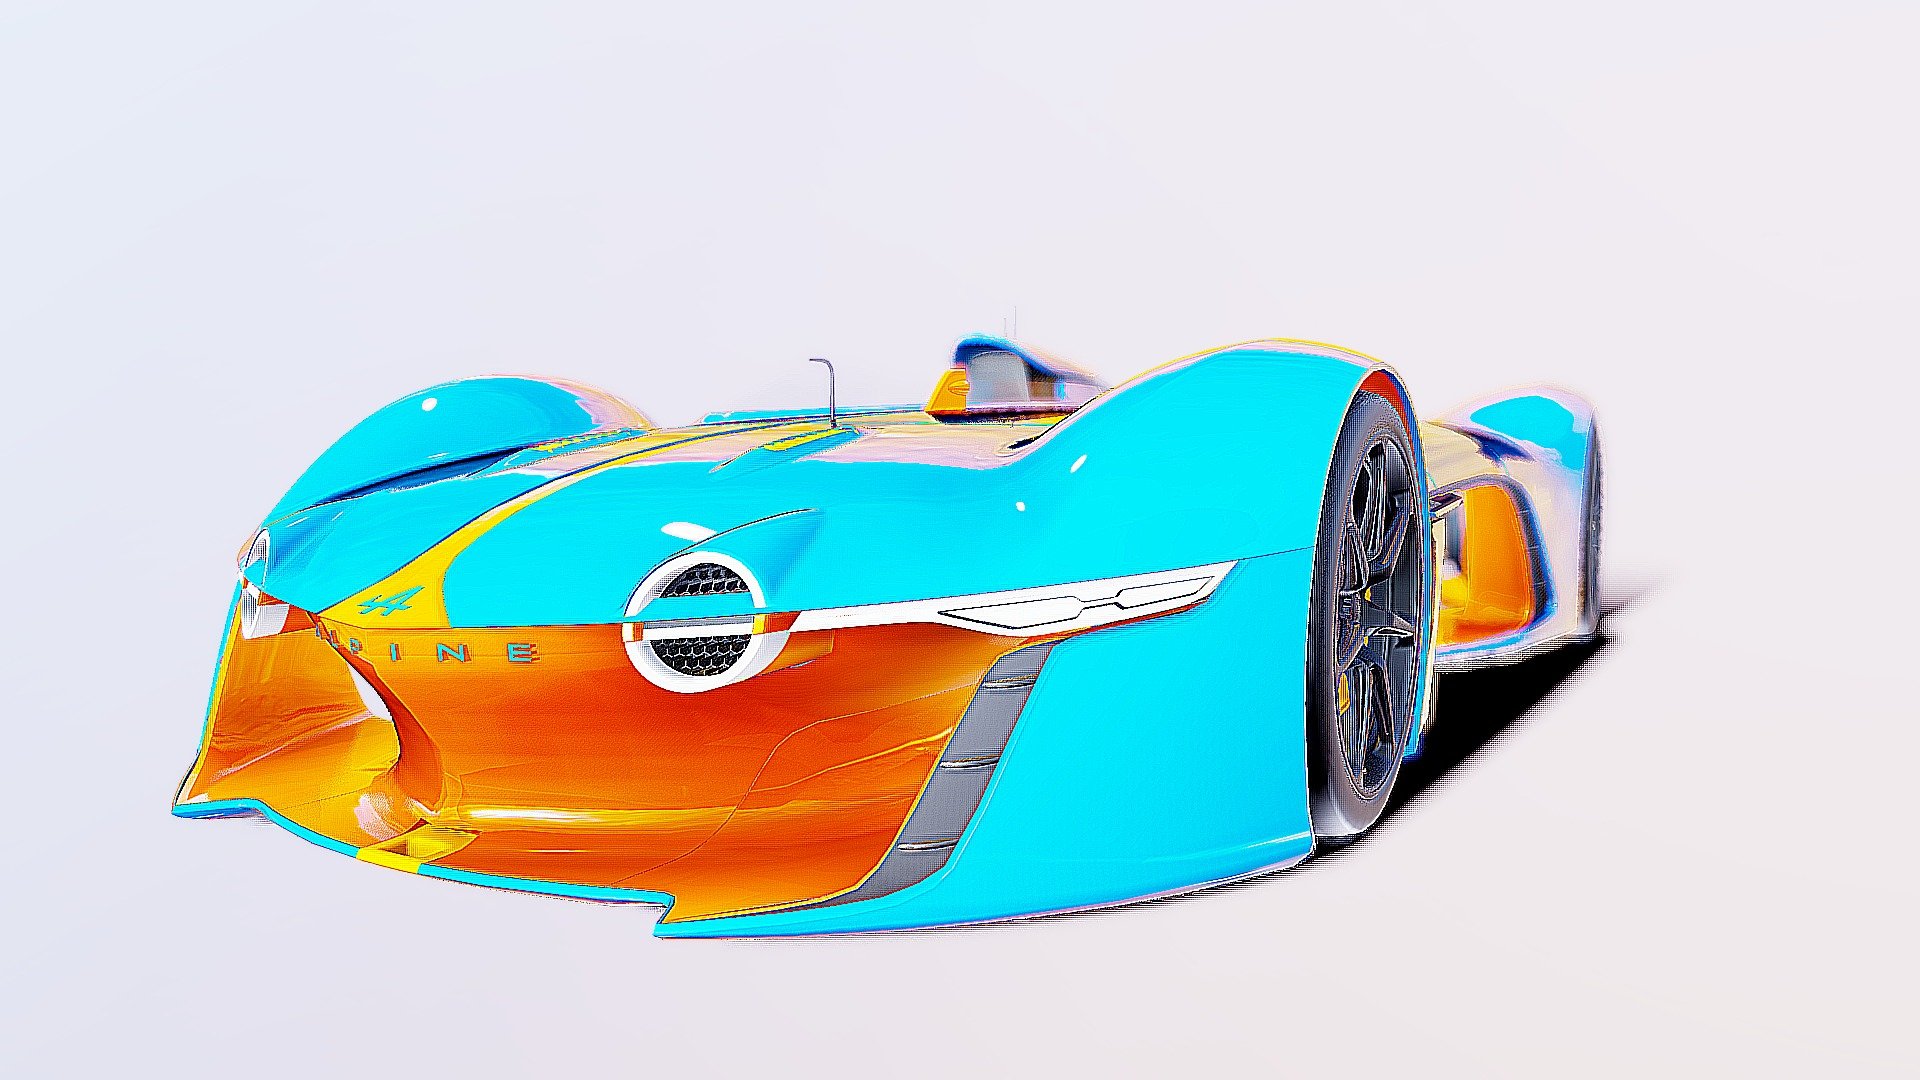 The Alpine Vision Gran Turismo 2017 is a concept race car produced by Alpine. It appears in Gran Turismo Sport and Gran Turismo 7. This car is an evolved version of the Alpine Vision Gran Turismo. It features optimized aerodynamics through the addition of a front spoiler, side intakes and rear wings 3d model